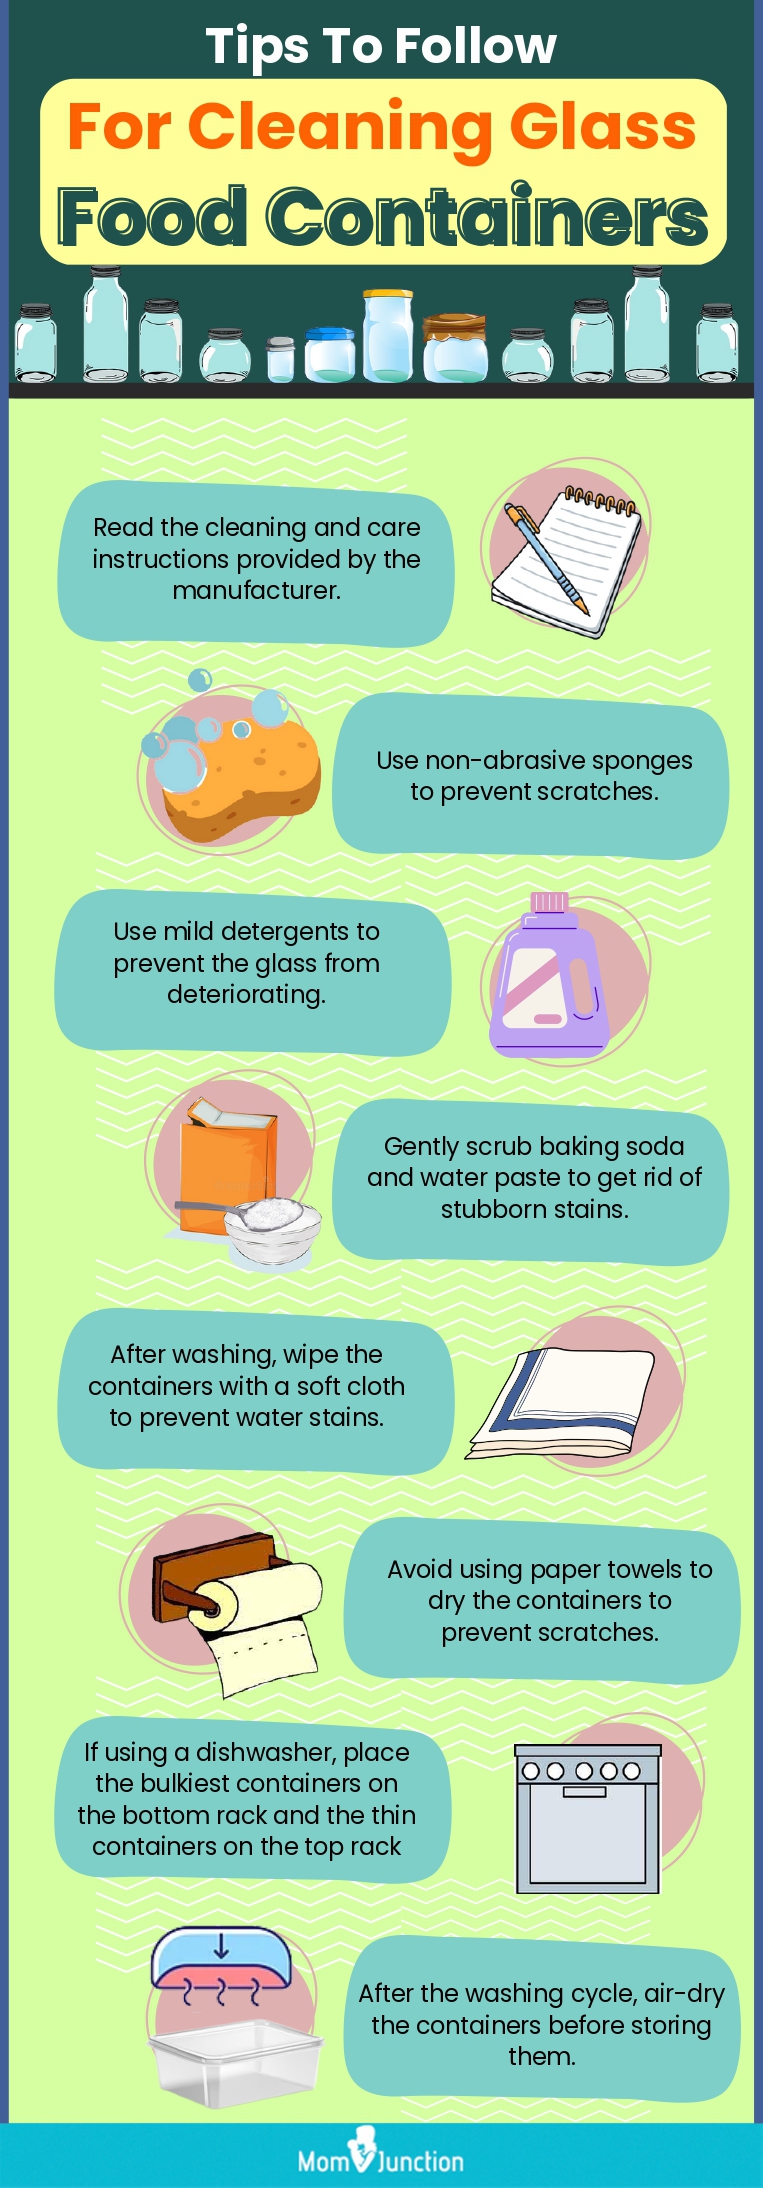 Tips To Follow For Cleaning Glass Food Containers (infographic)